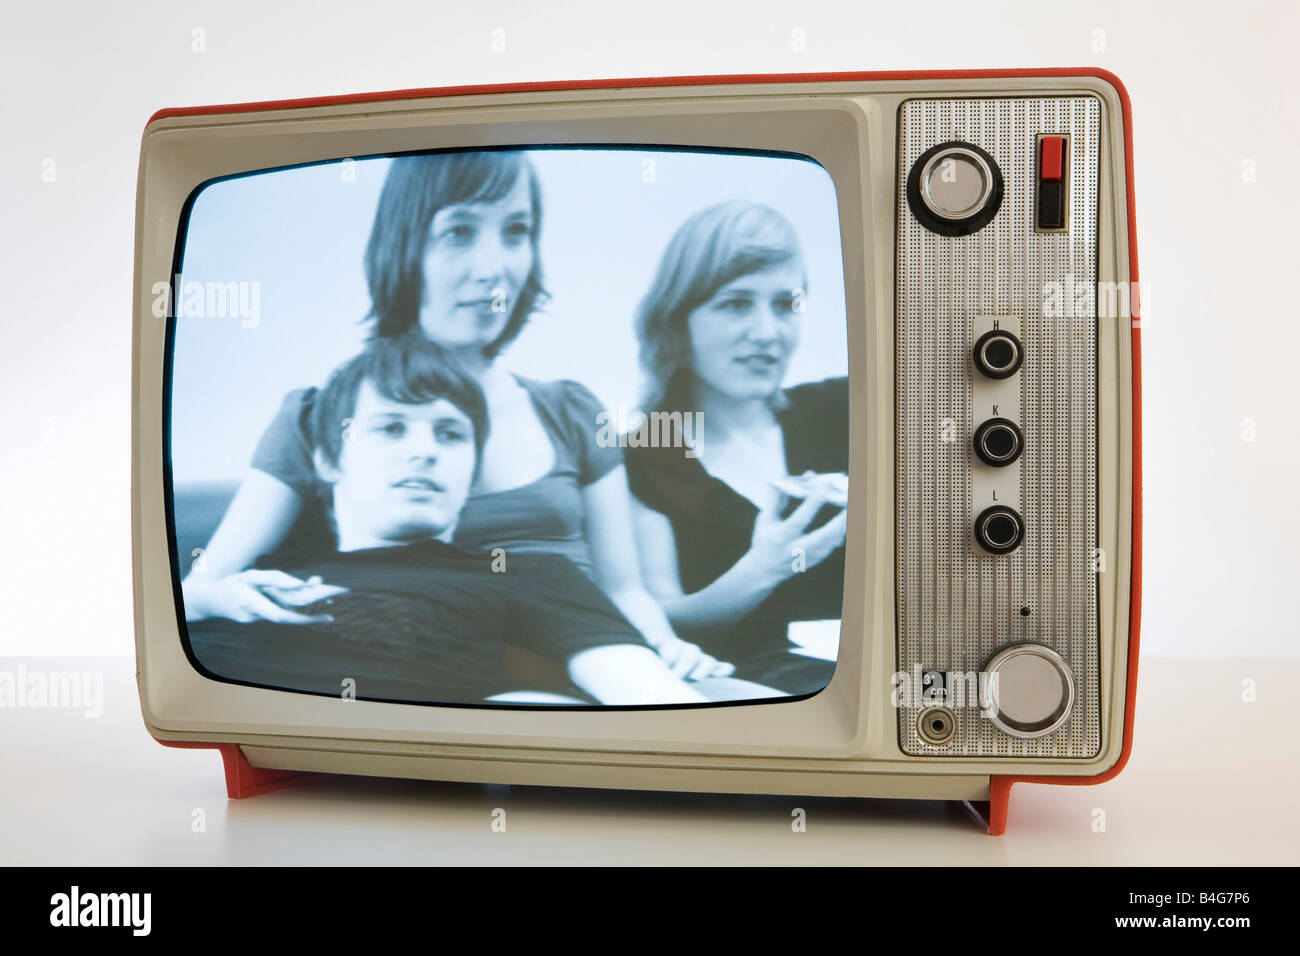 A television with a black and white image of three young people Stock Photo